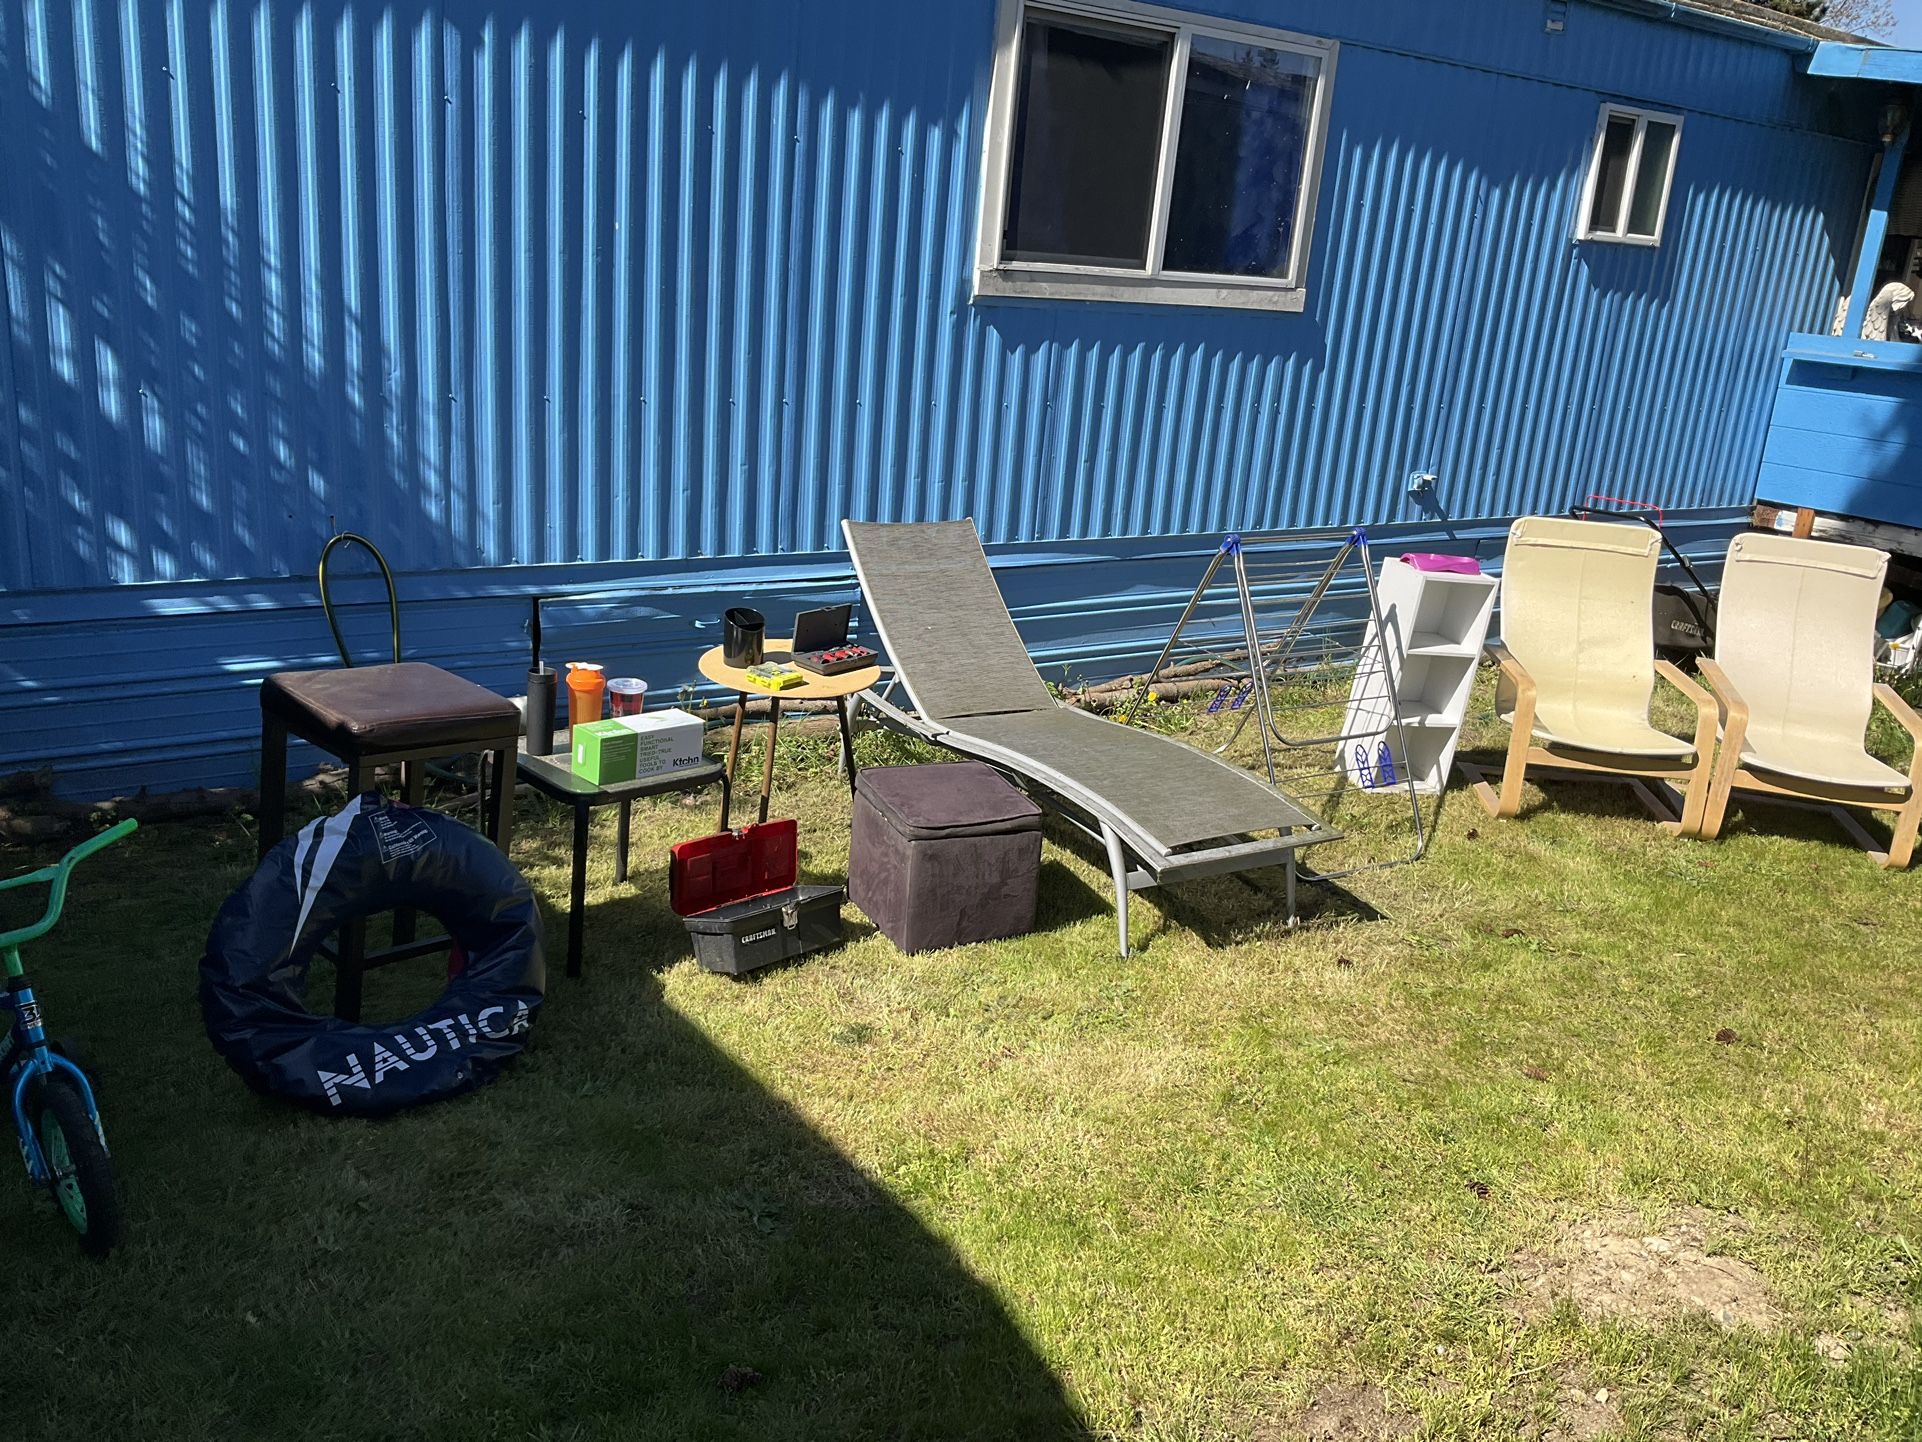 Yard Sale: Household Items For Sale CASH ONLY